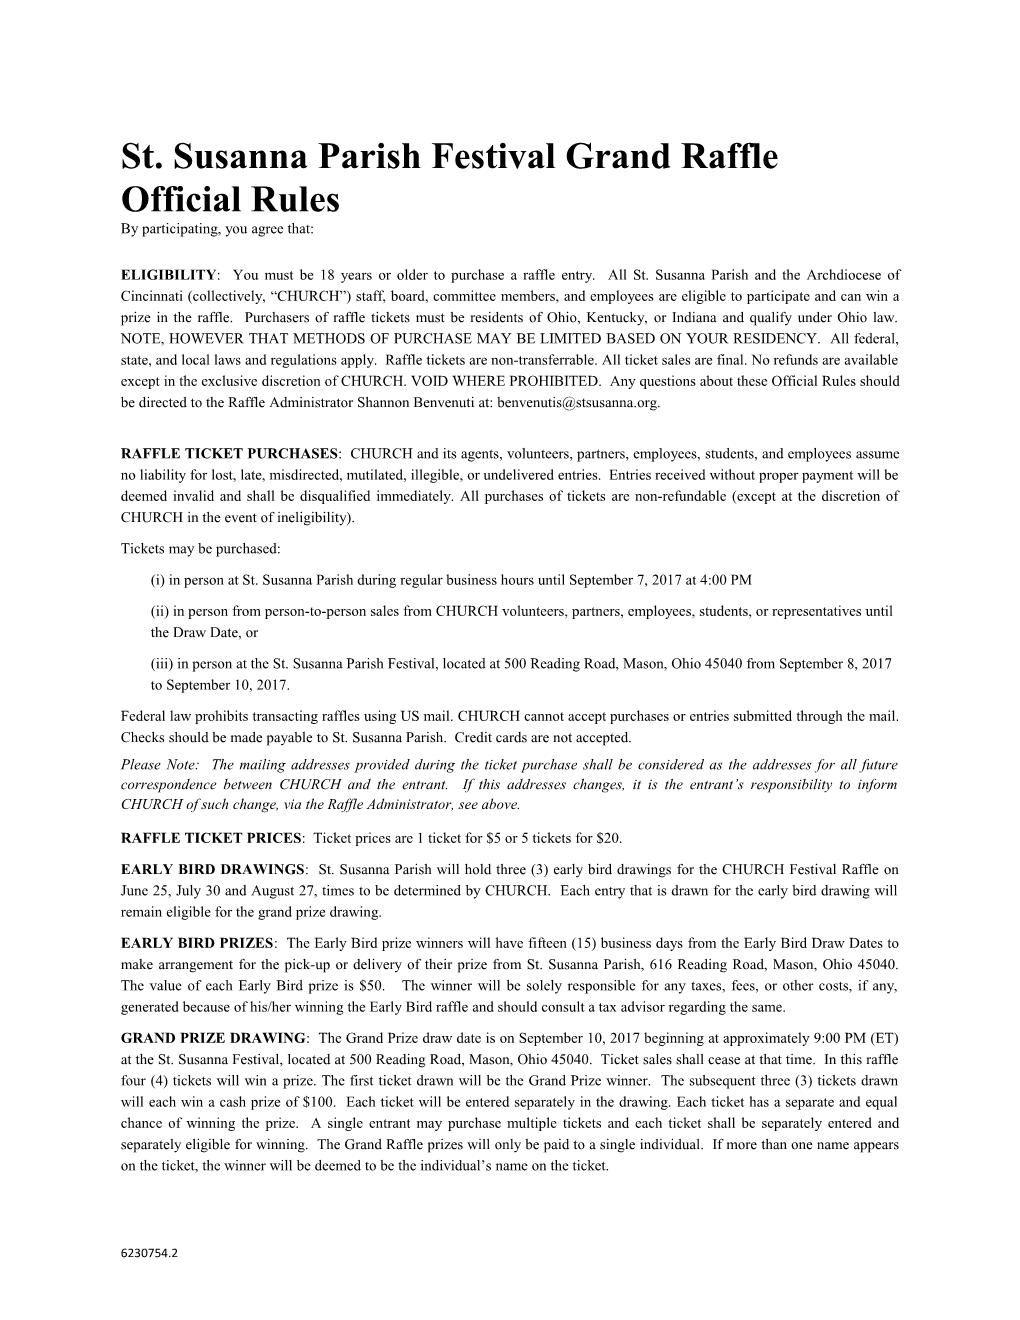 St. Susanna Parish Festival Grand Raffle Official Rules by Participating, You Agree That